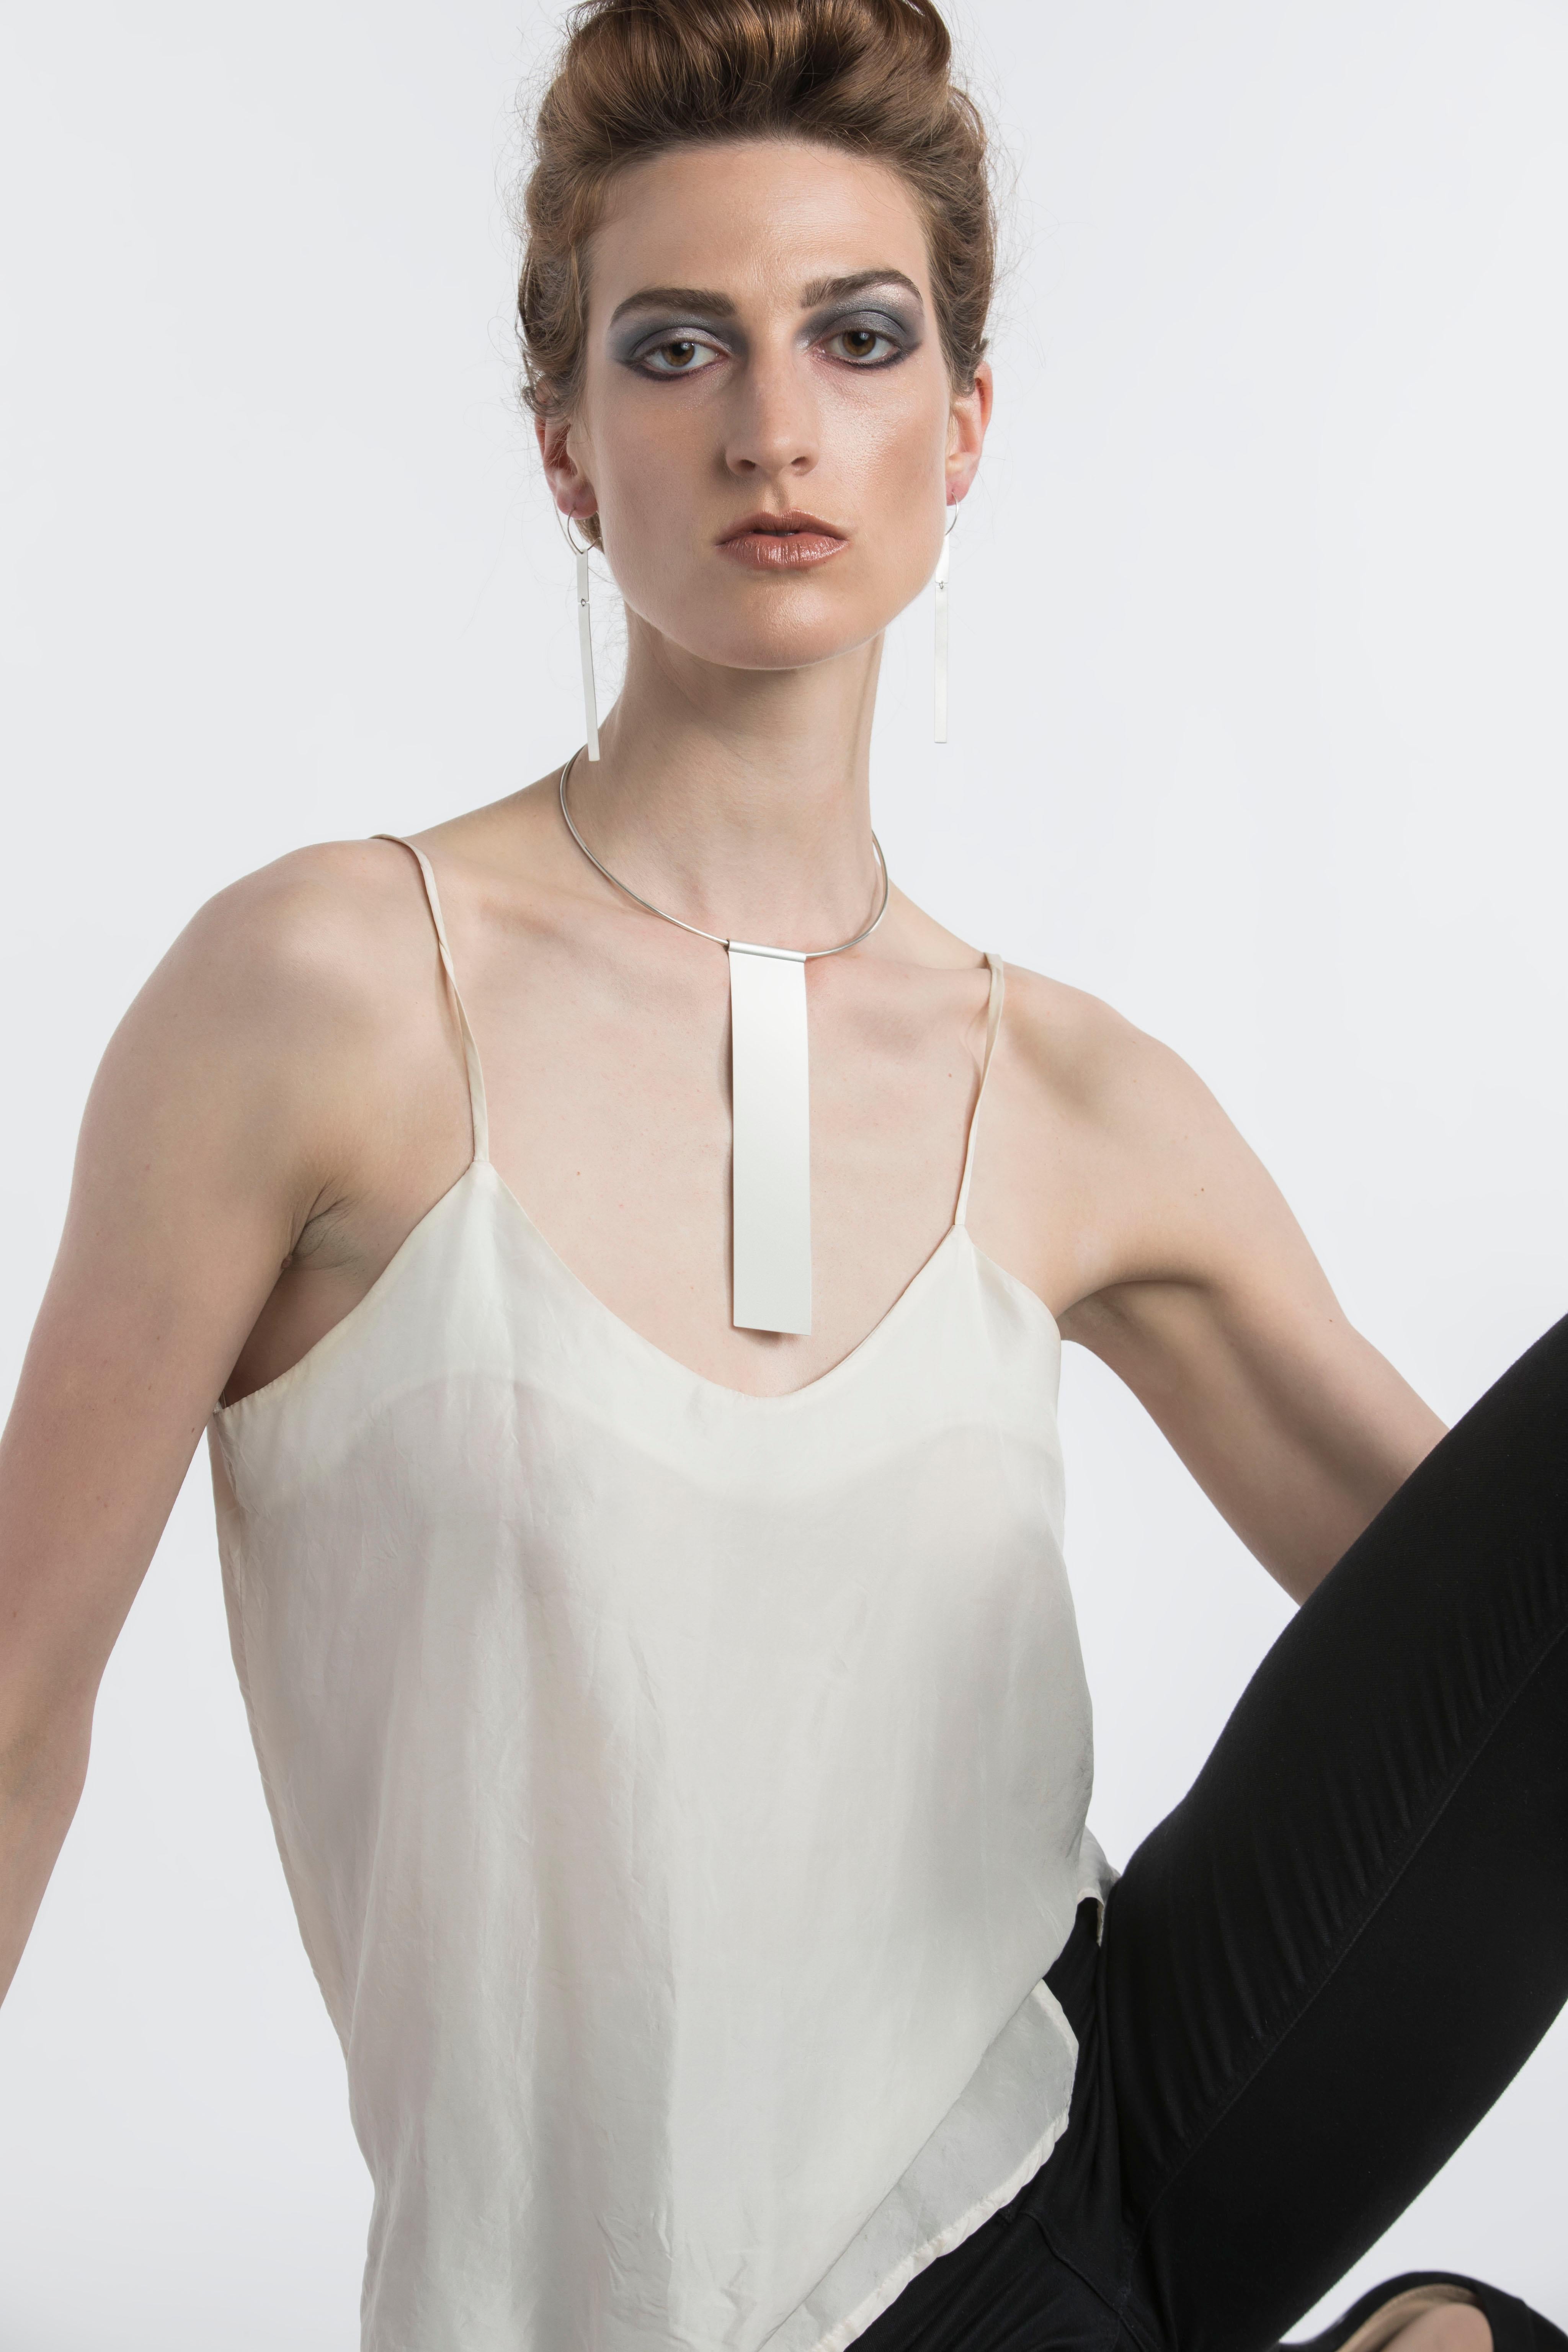 Handcrafted by artist Kyla Katz in the United States, this sterling silver collar is minimalist perfection. Stand out with simplicity with this distinctive piece. Pendant is 6